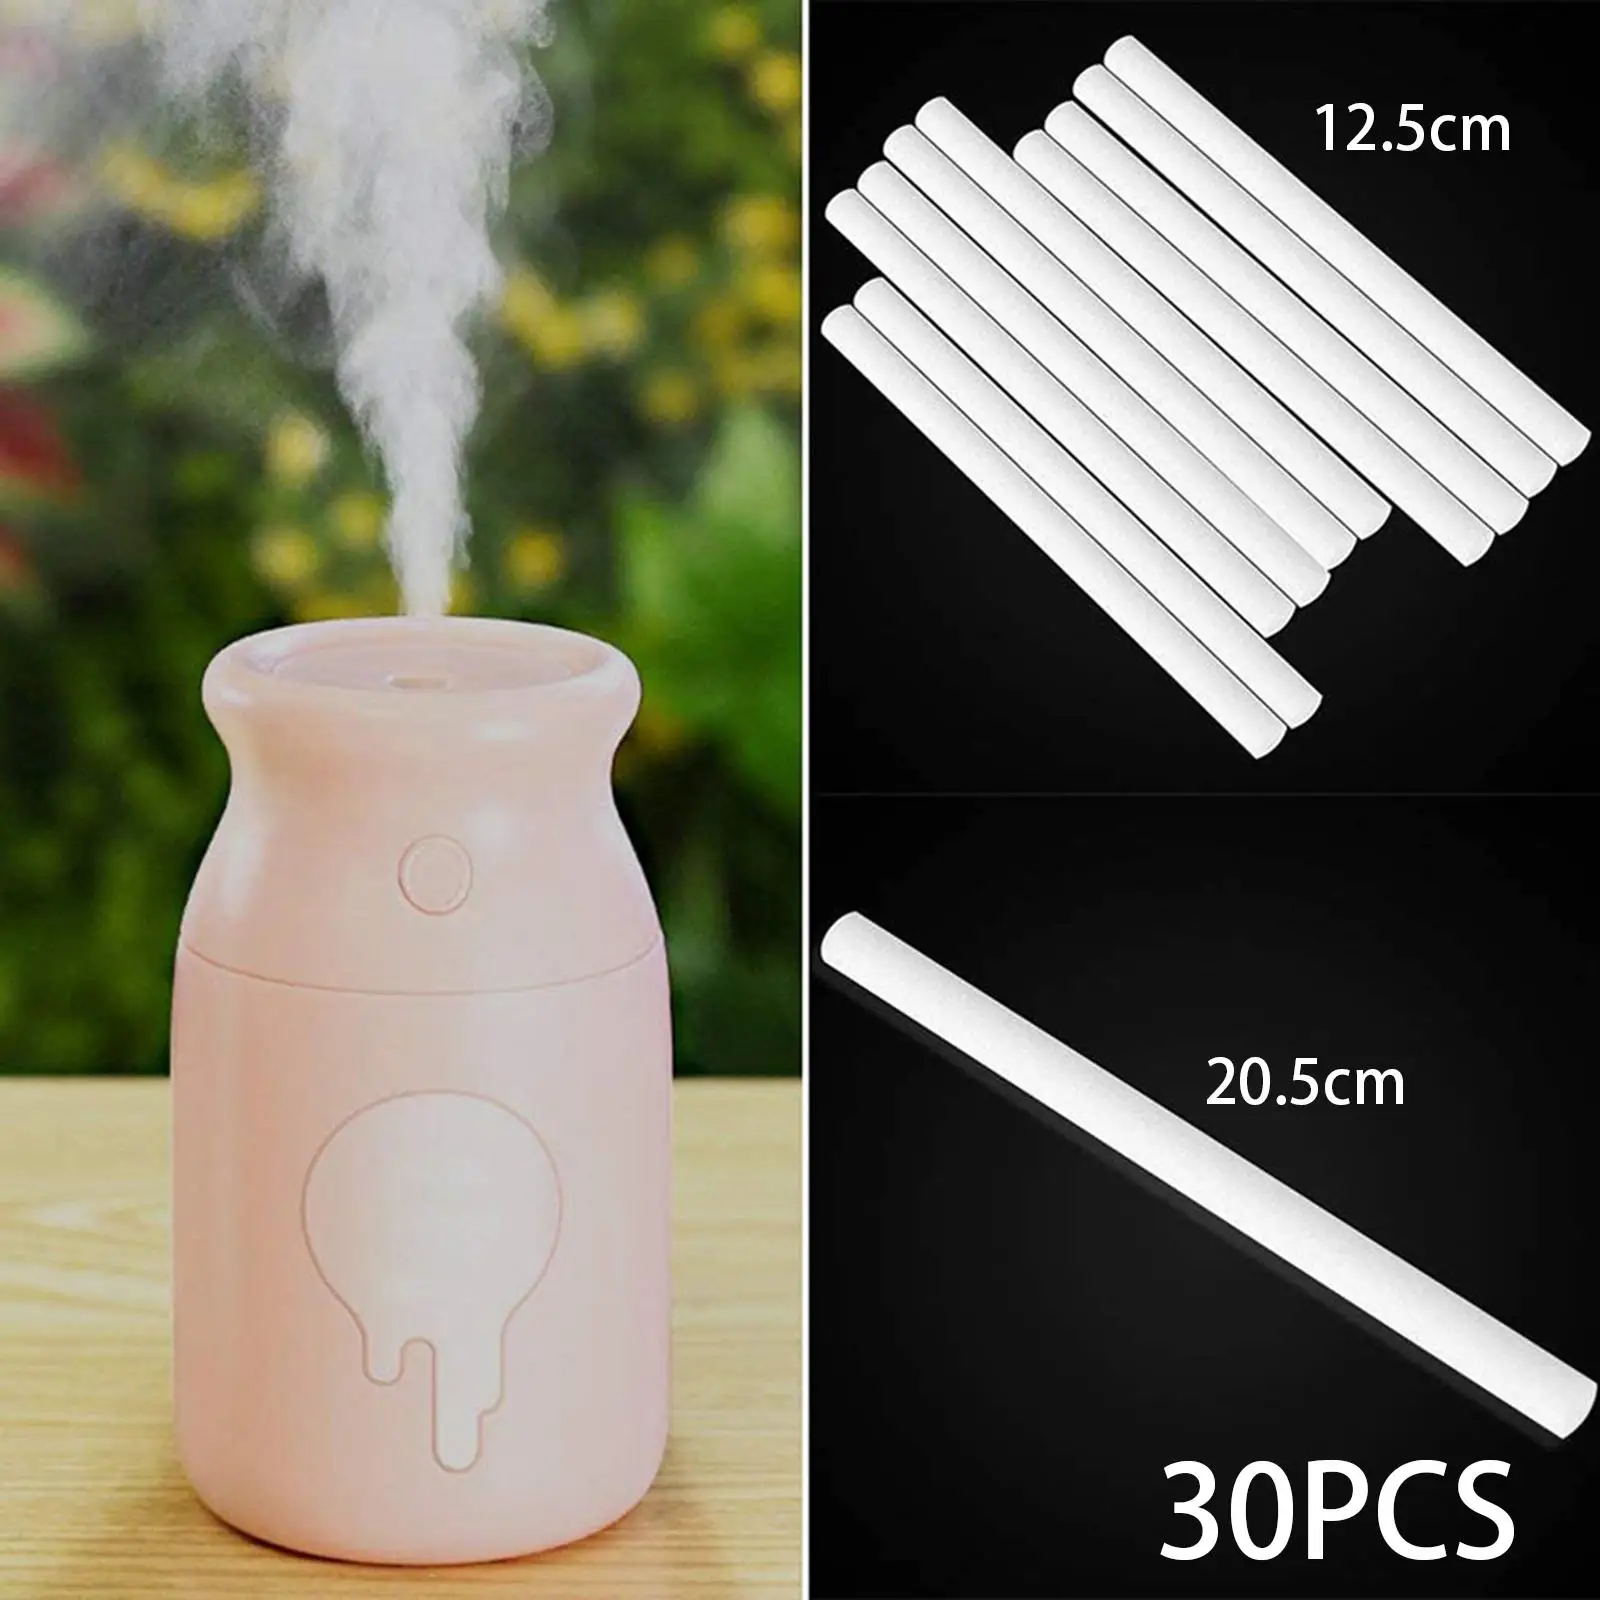 Sponge Filter Sticks Car Humidifier Replacement Parts Absorbent Sponge Sticks for Ultrasonic Aroma Diffuser Car Office Home